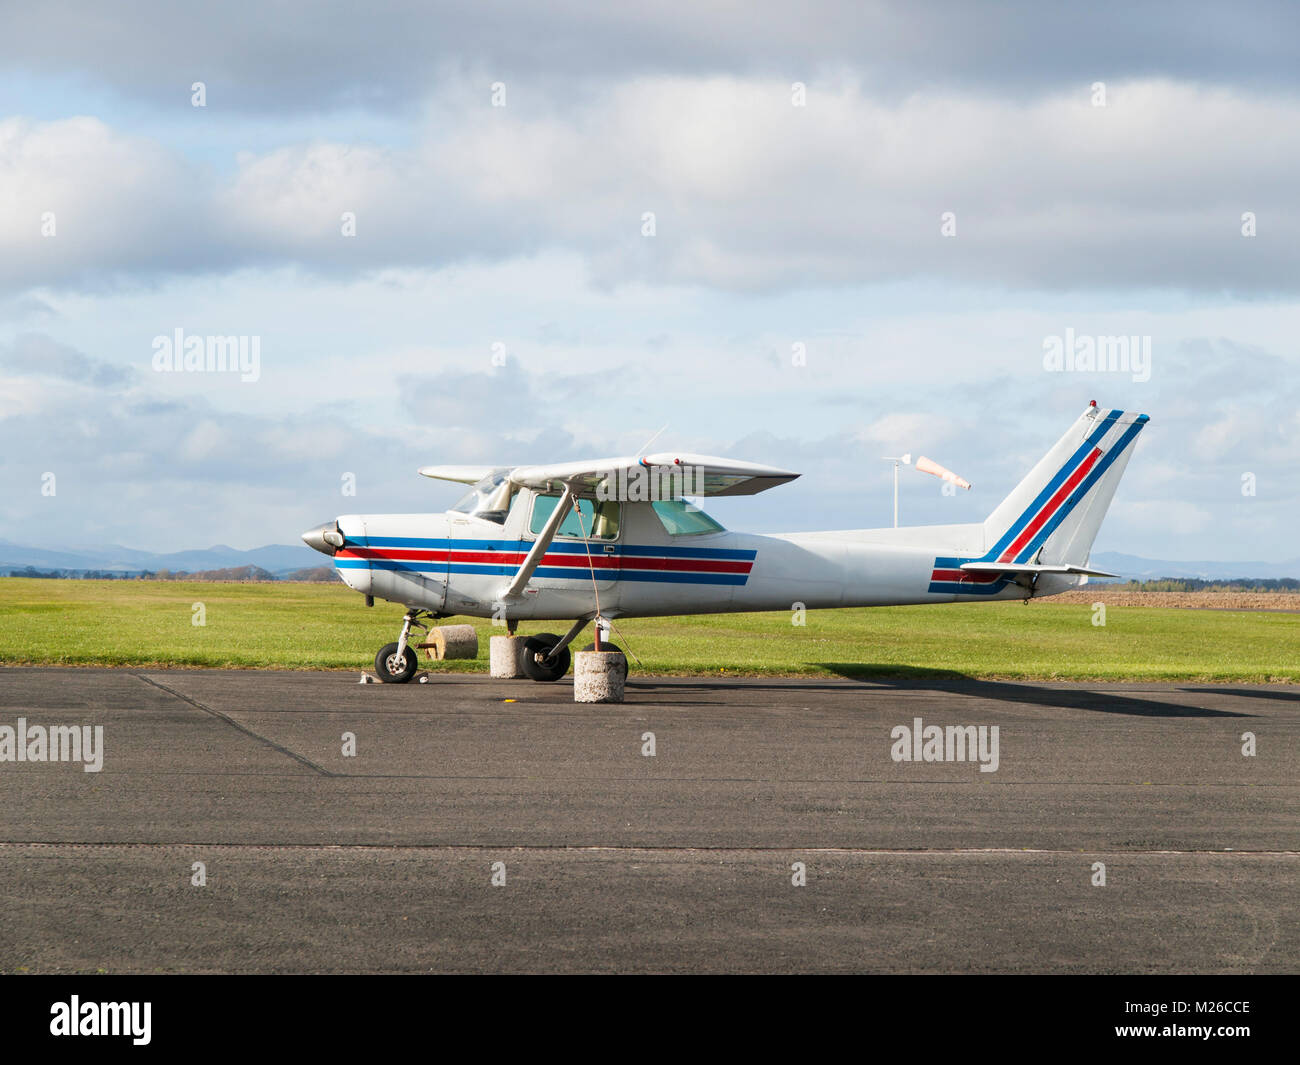 Small sport single-engine plane parked on runway Stock Photo